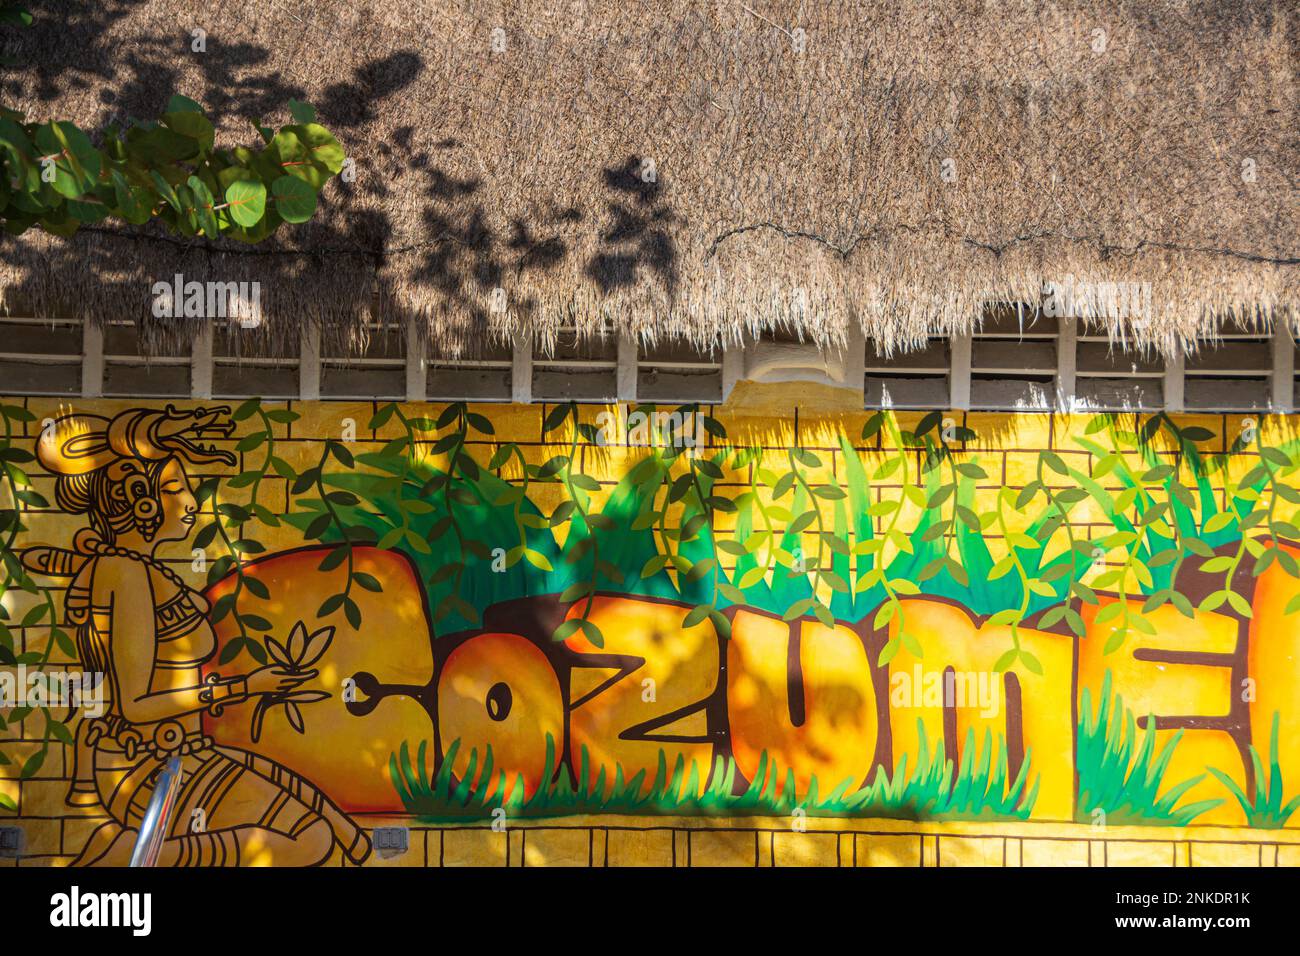 The word 'Cozumel' painted on a restaurant, Cozumel, Mexico. Stock Photo